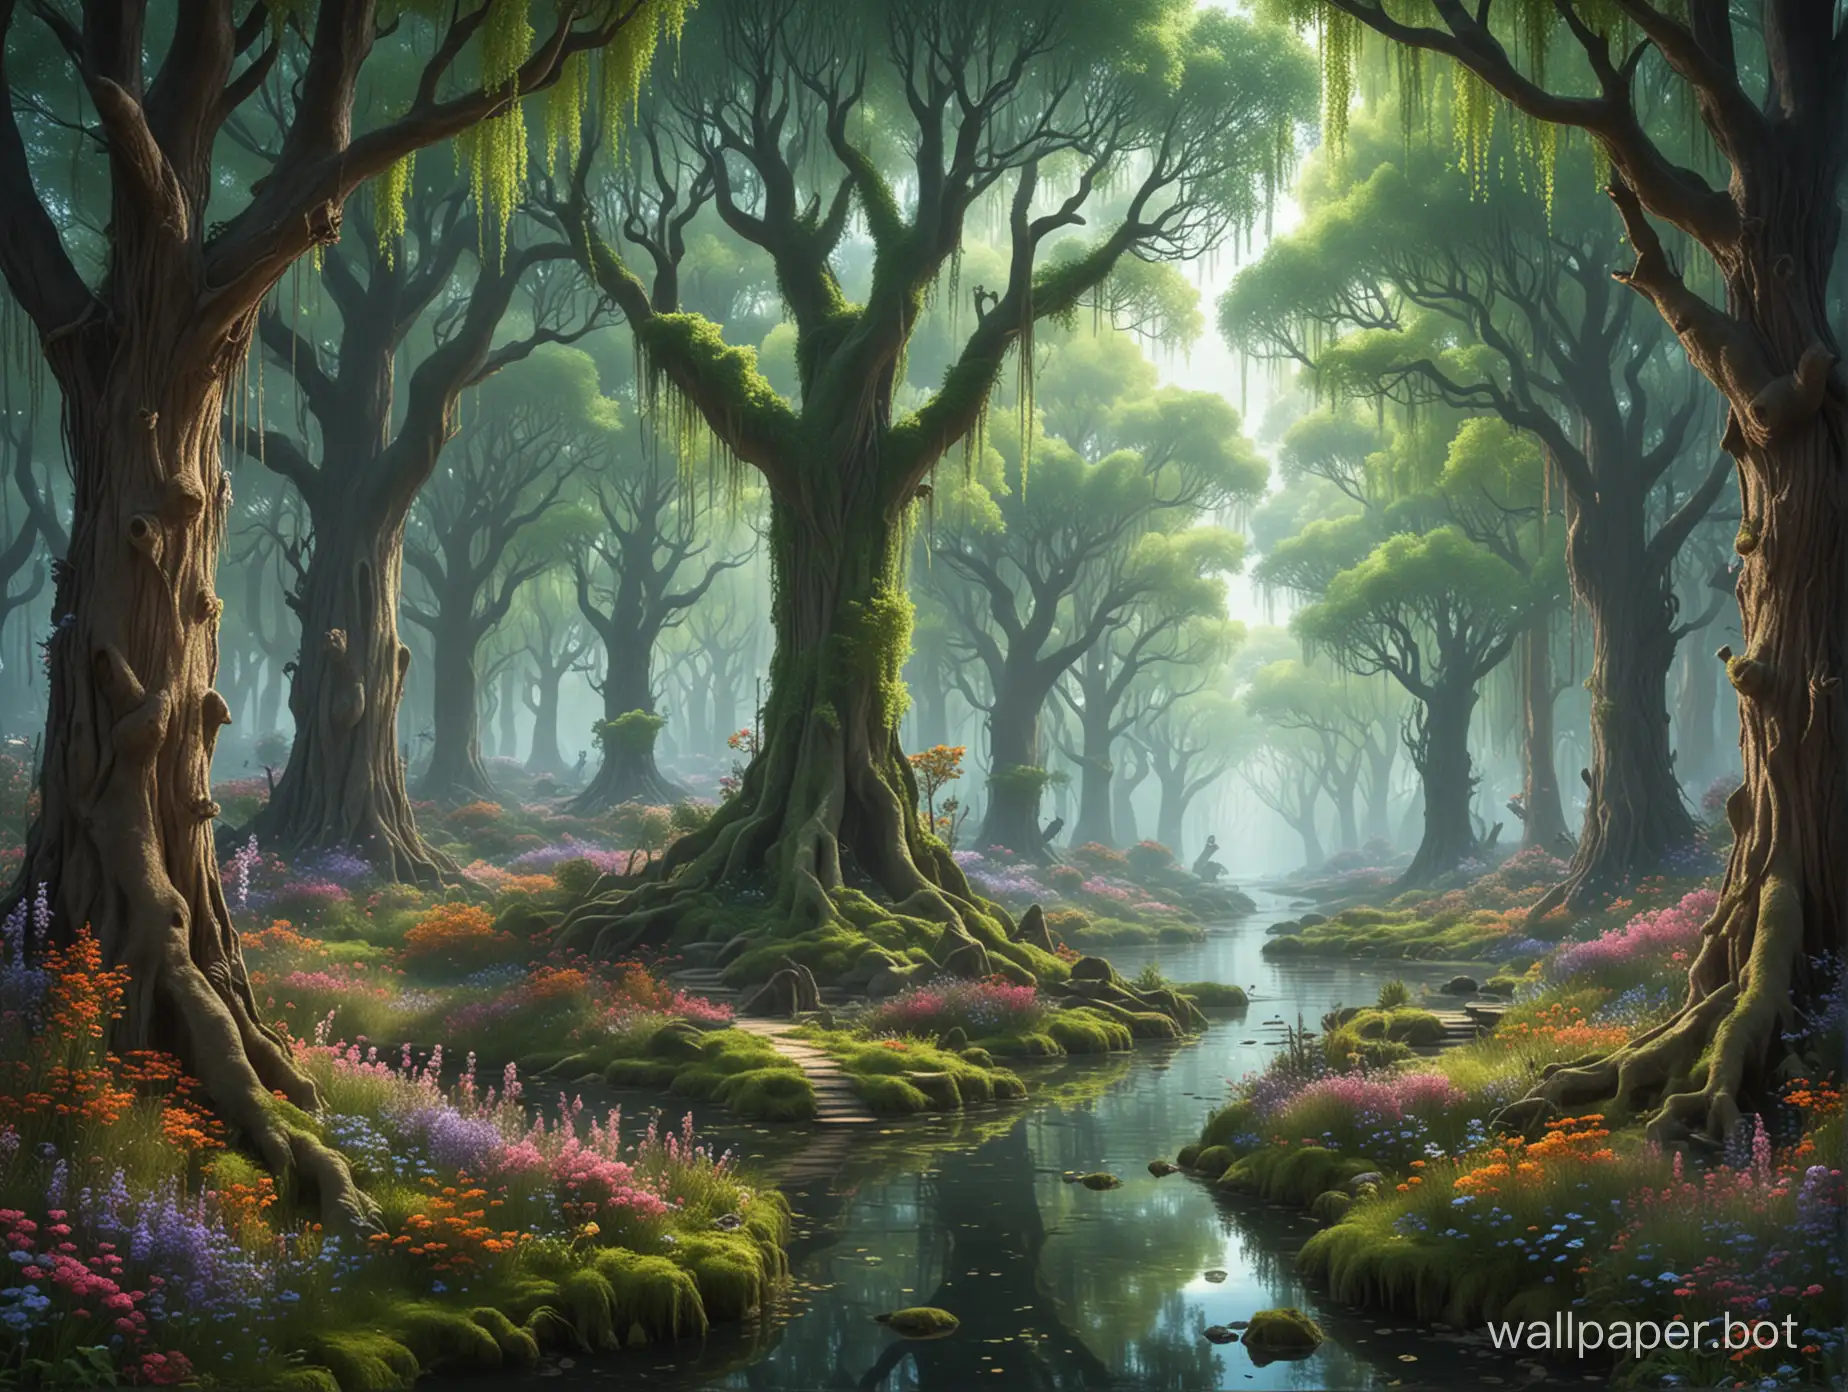 Deep fantasy forest, with willow trees and flowers of many species, and mystical creatures like dragons and fairies